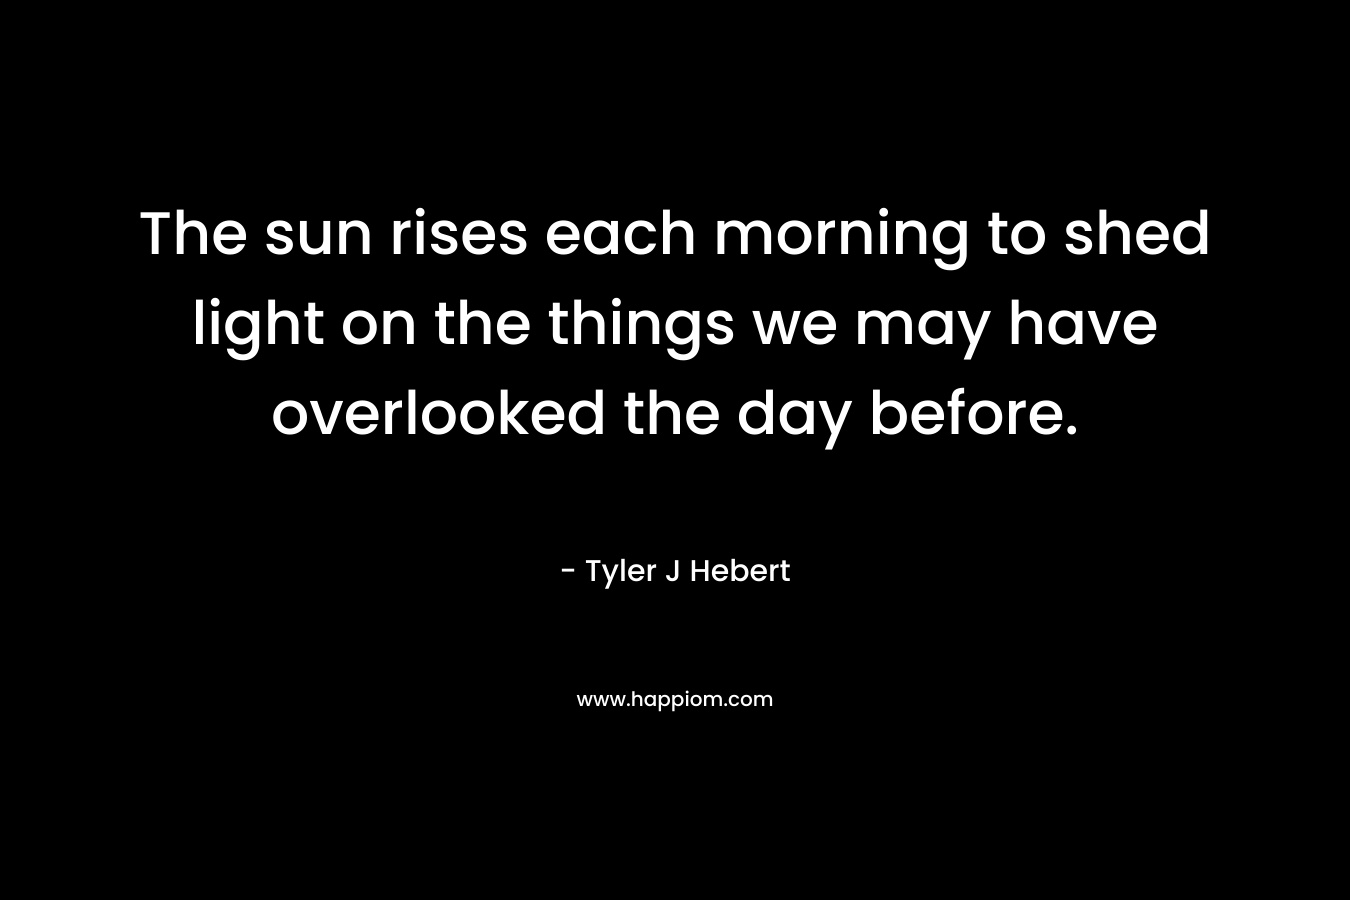 The sun rises each morning to shed light on the things we may have overlooked the day before. – Tyler J Hebert